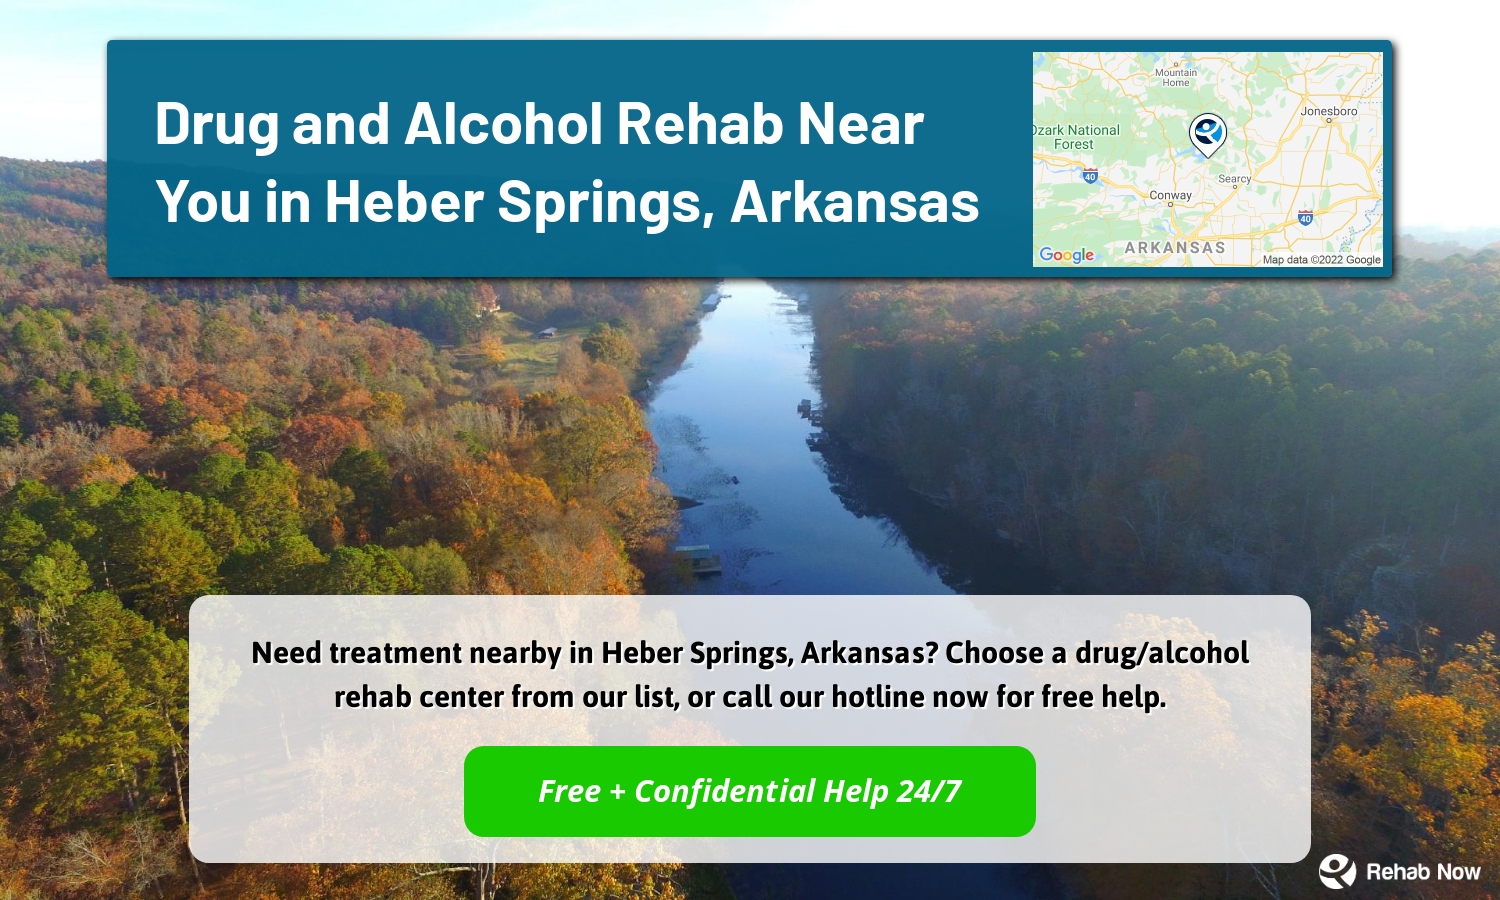 Need treatment nearby in Heber Springs, Arkansas? Choose a drug/alcohol rehab center from our list, or call our hotline now for free help.